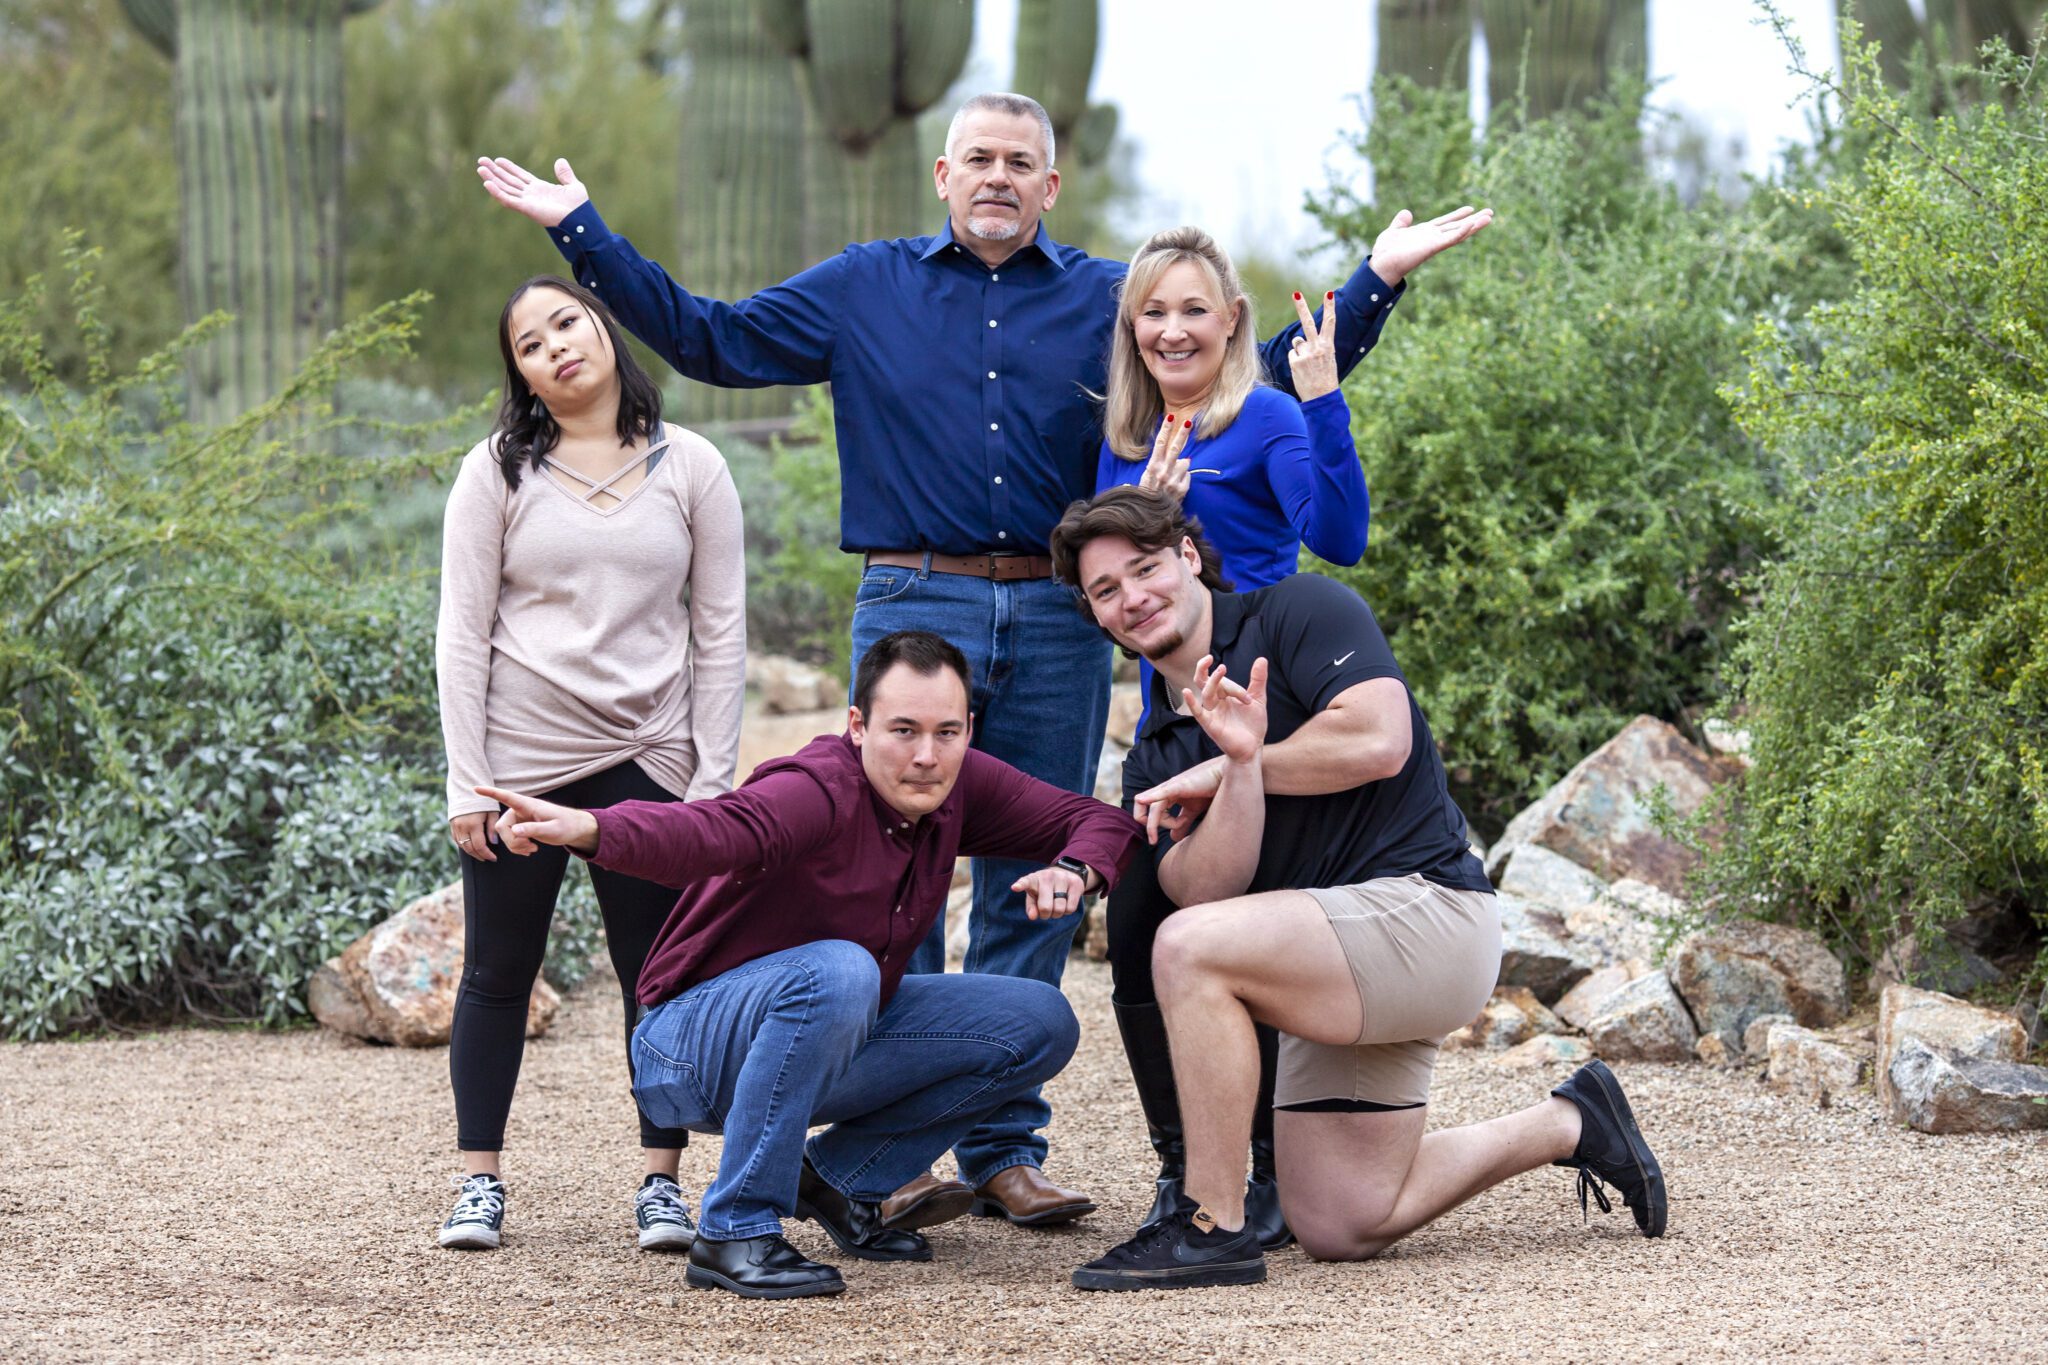 Fun extended family photo at the gilbert riparian preserve